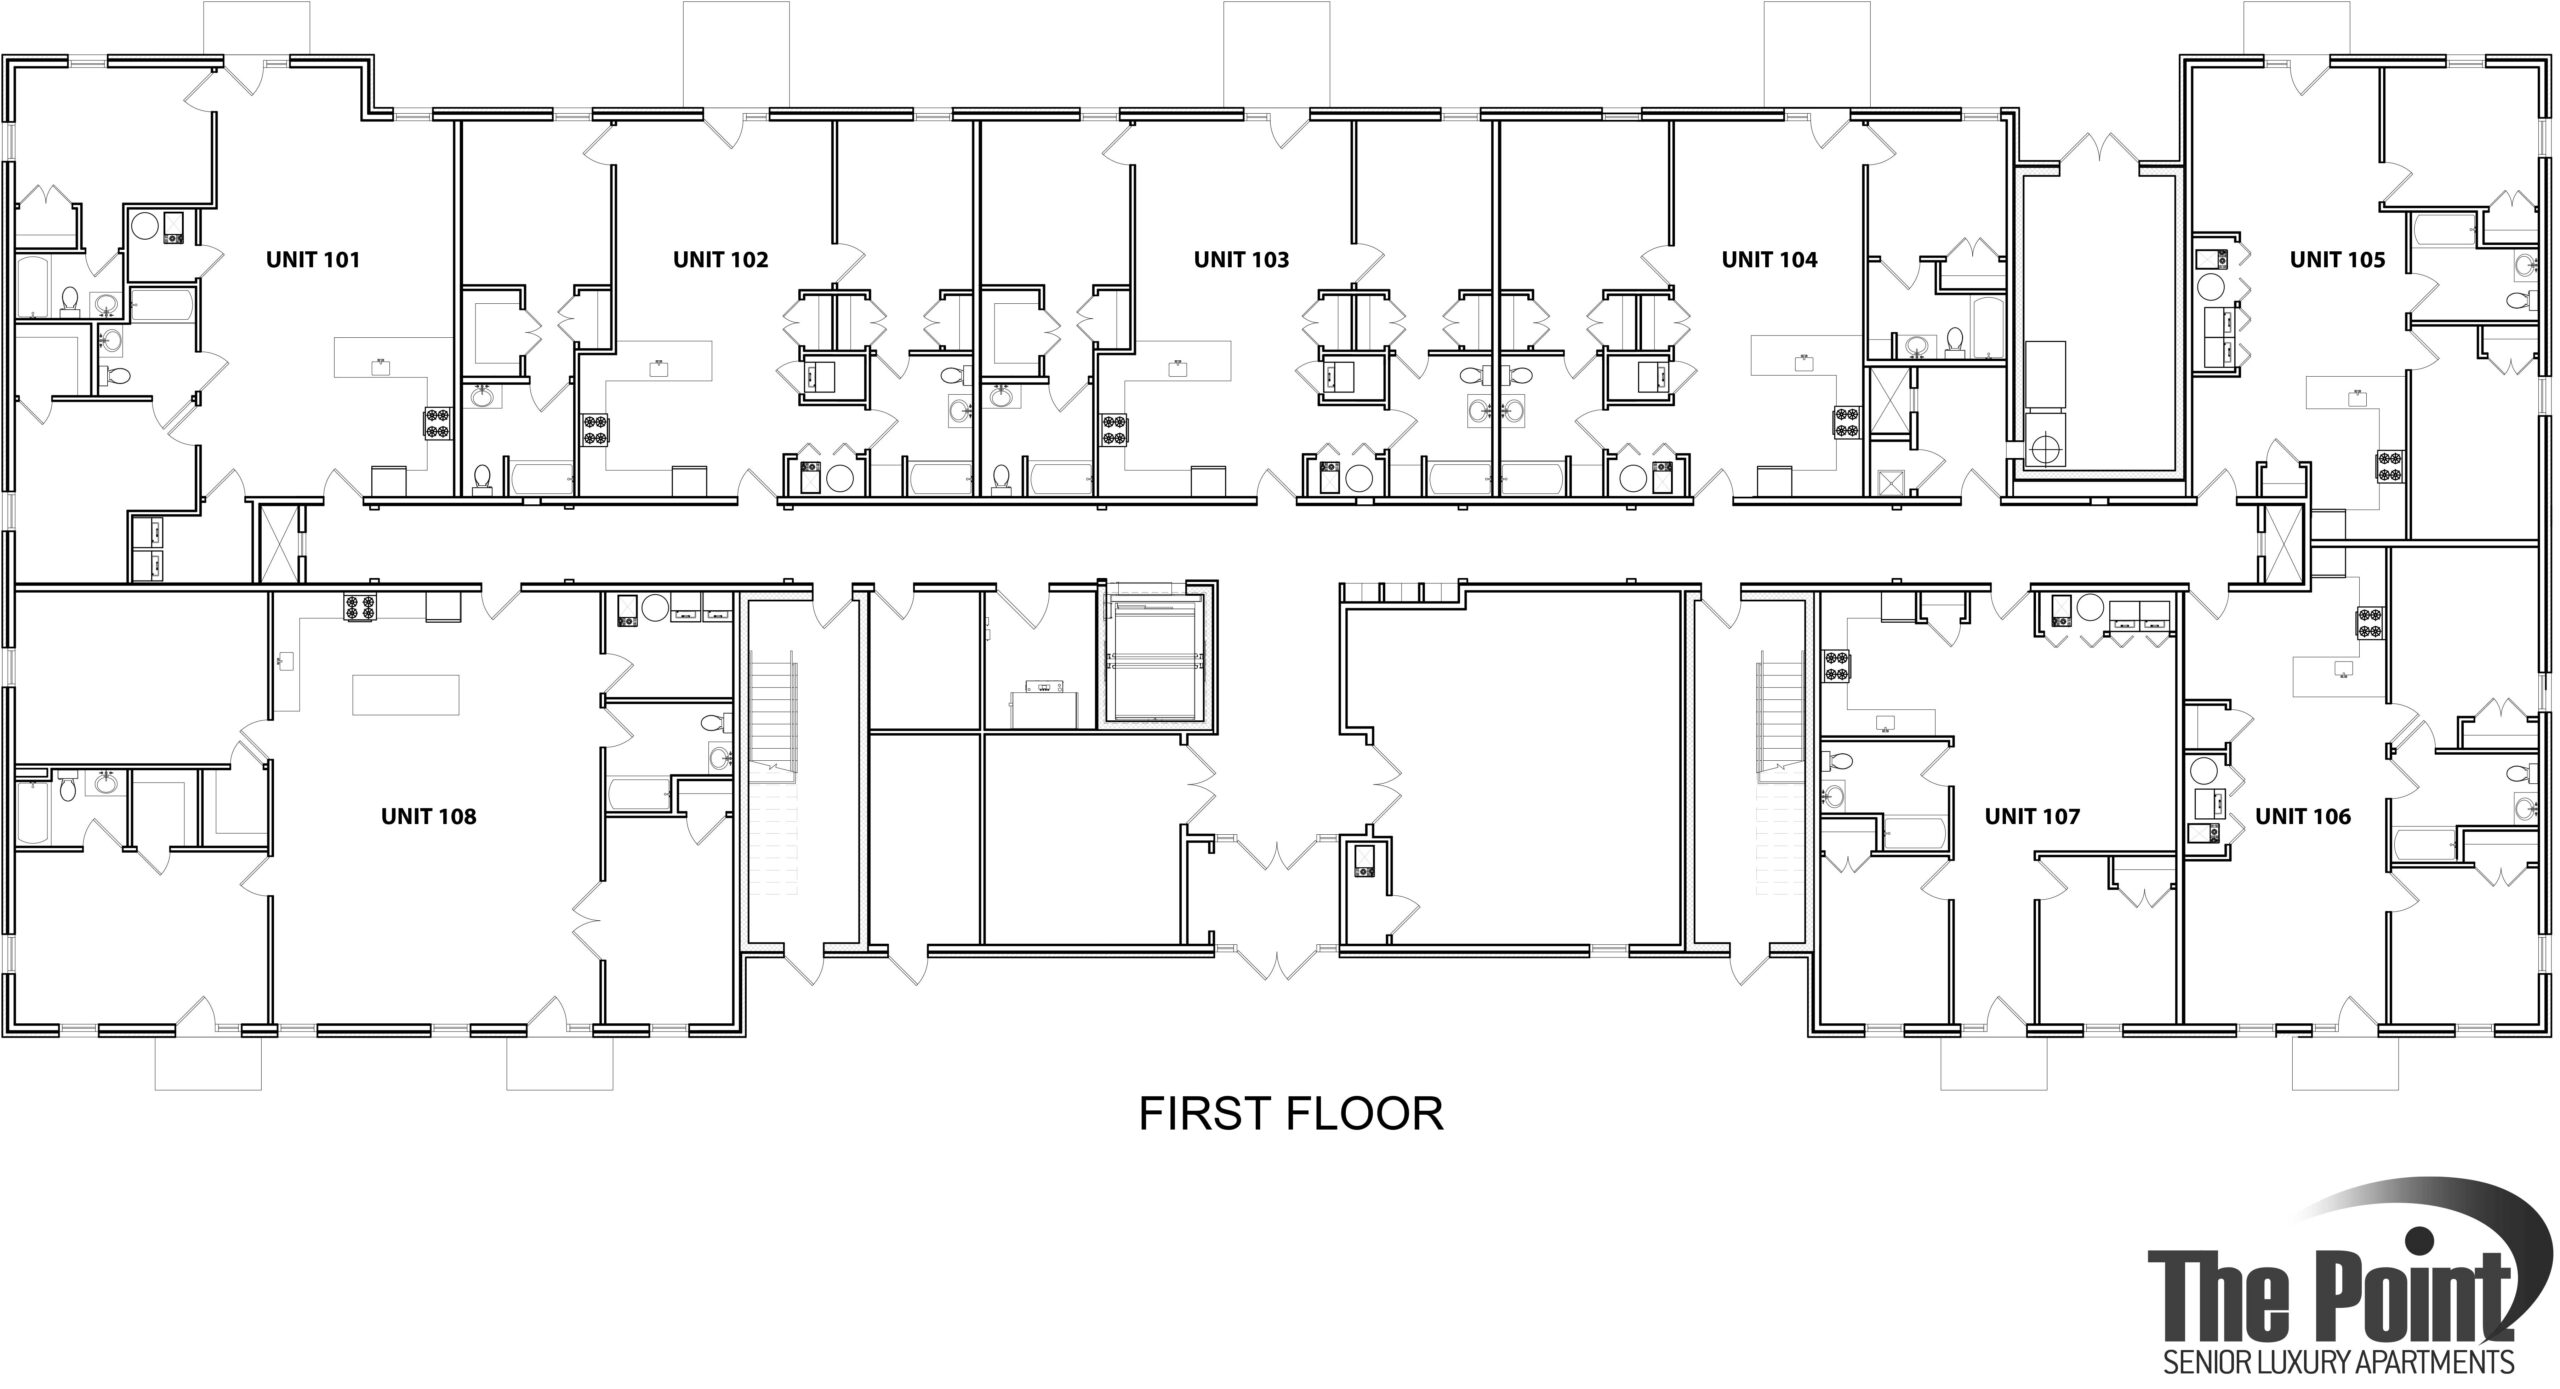 Building First Floor Layout